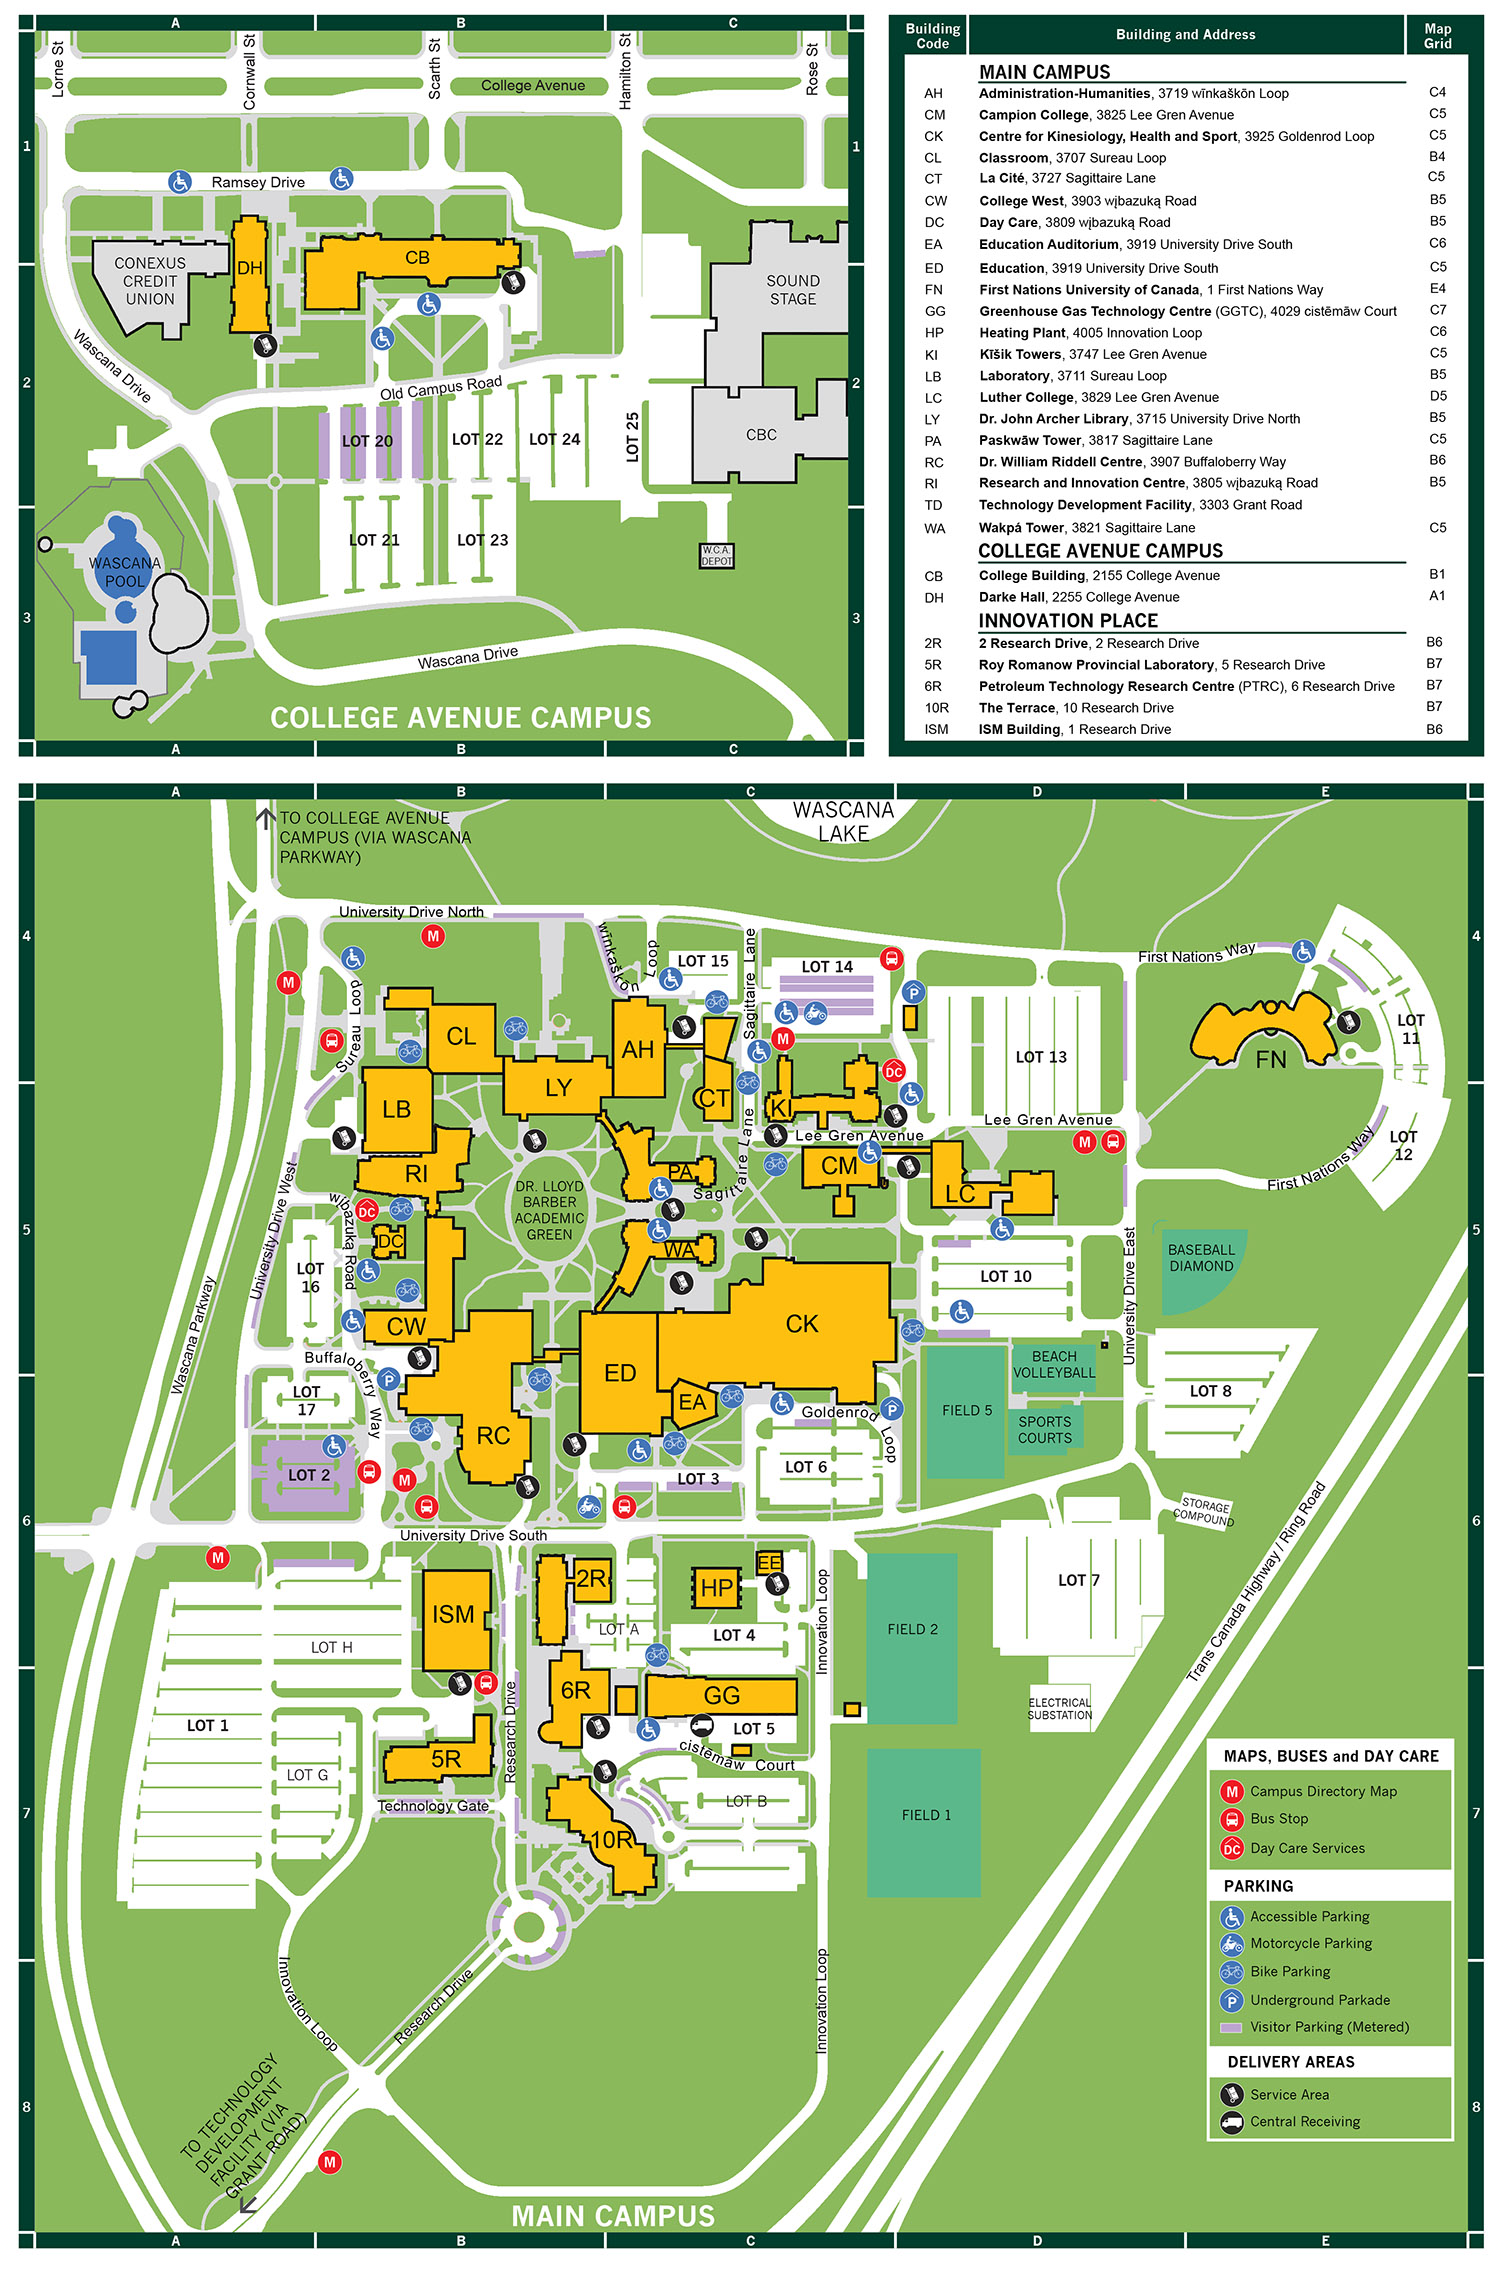 u of r campus map Campus Maps And Directions Contact Us University Of Regina u of r campus map